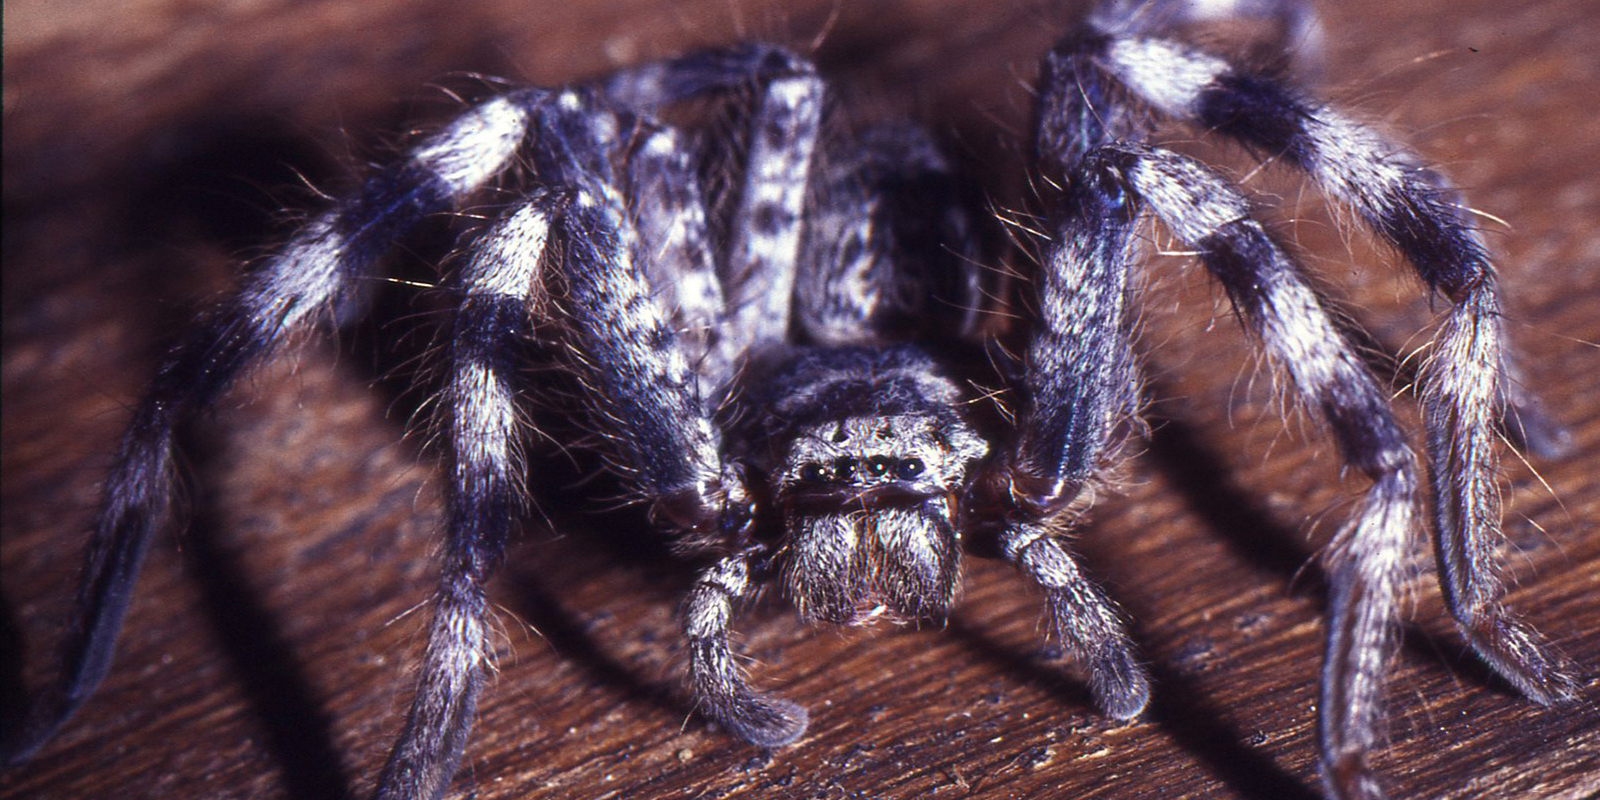 A close up of a hairy spider and its eyes